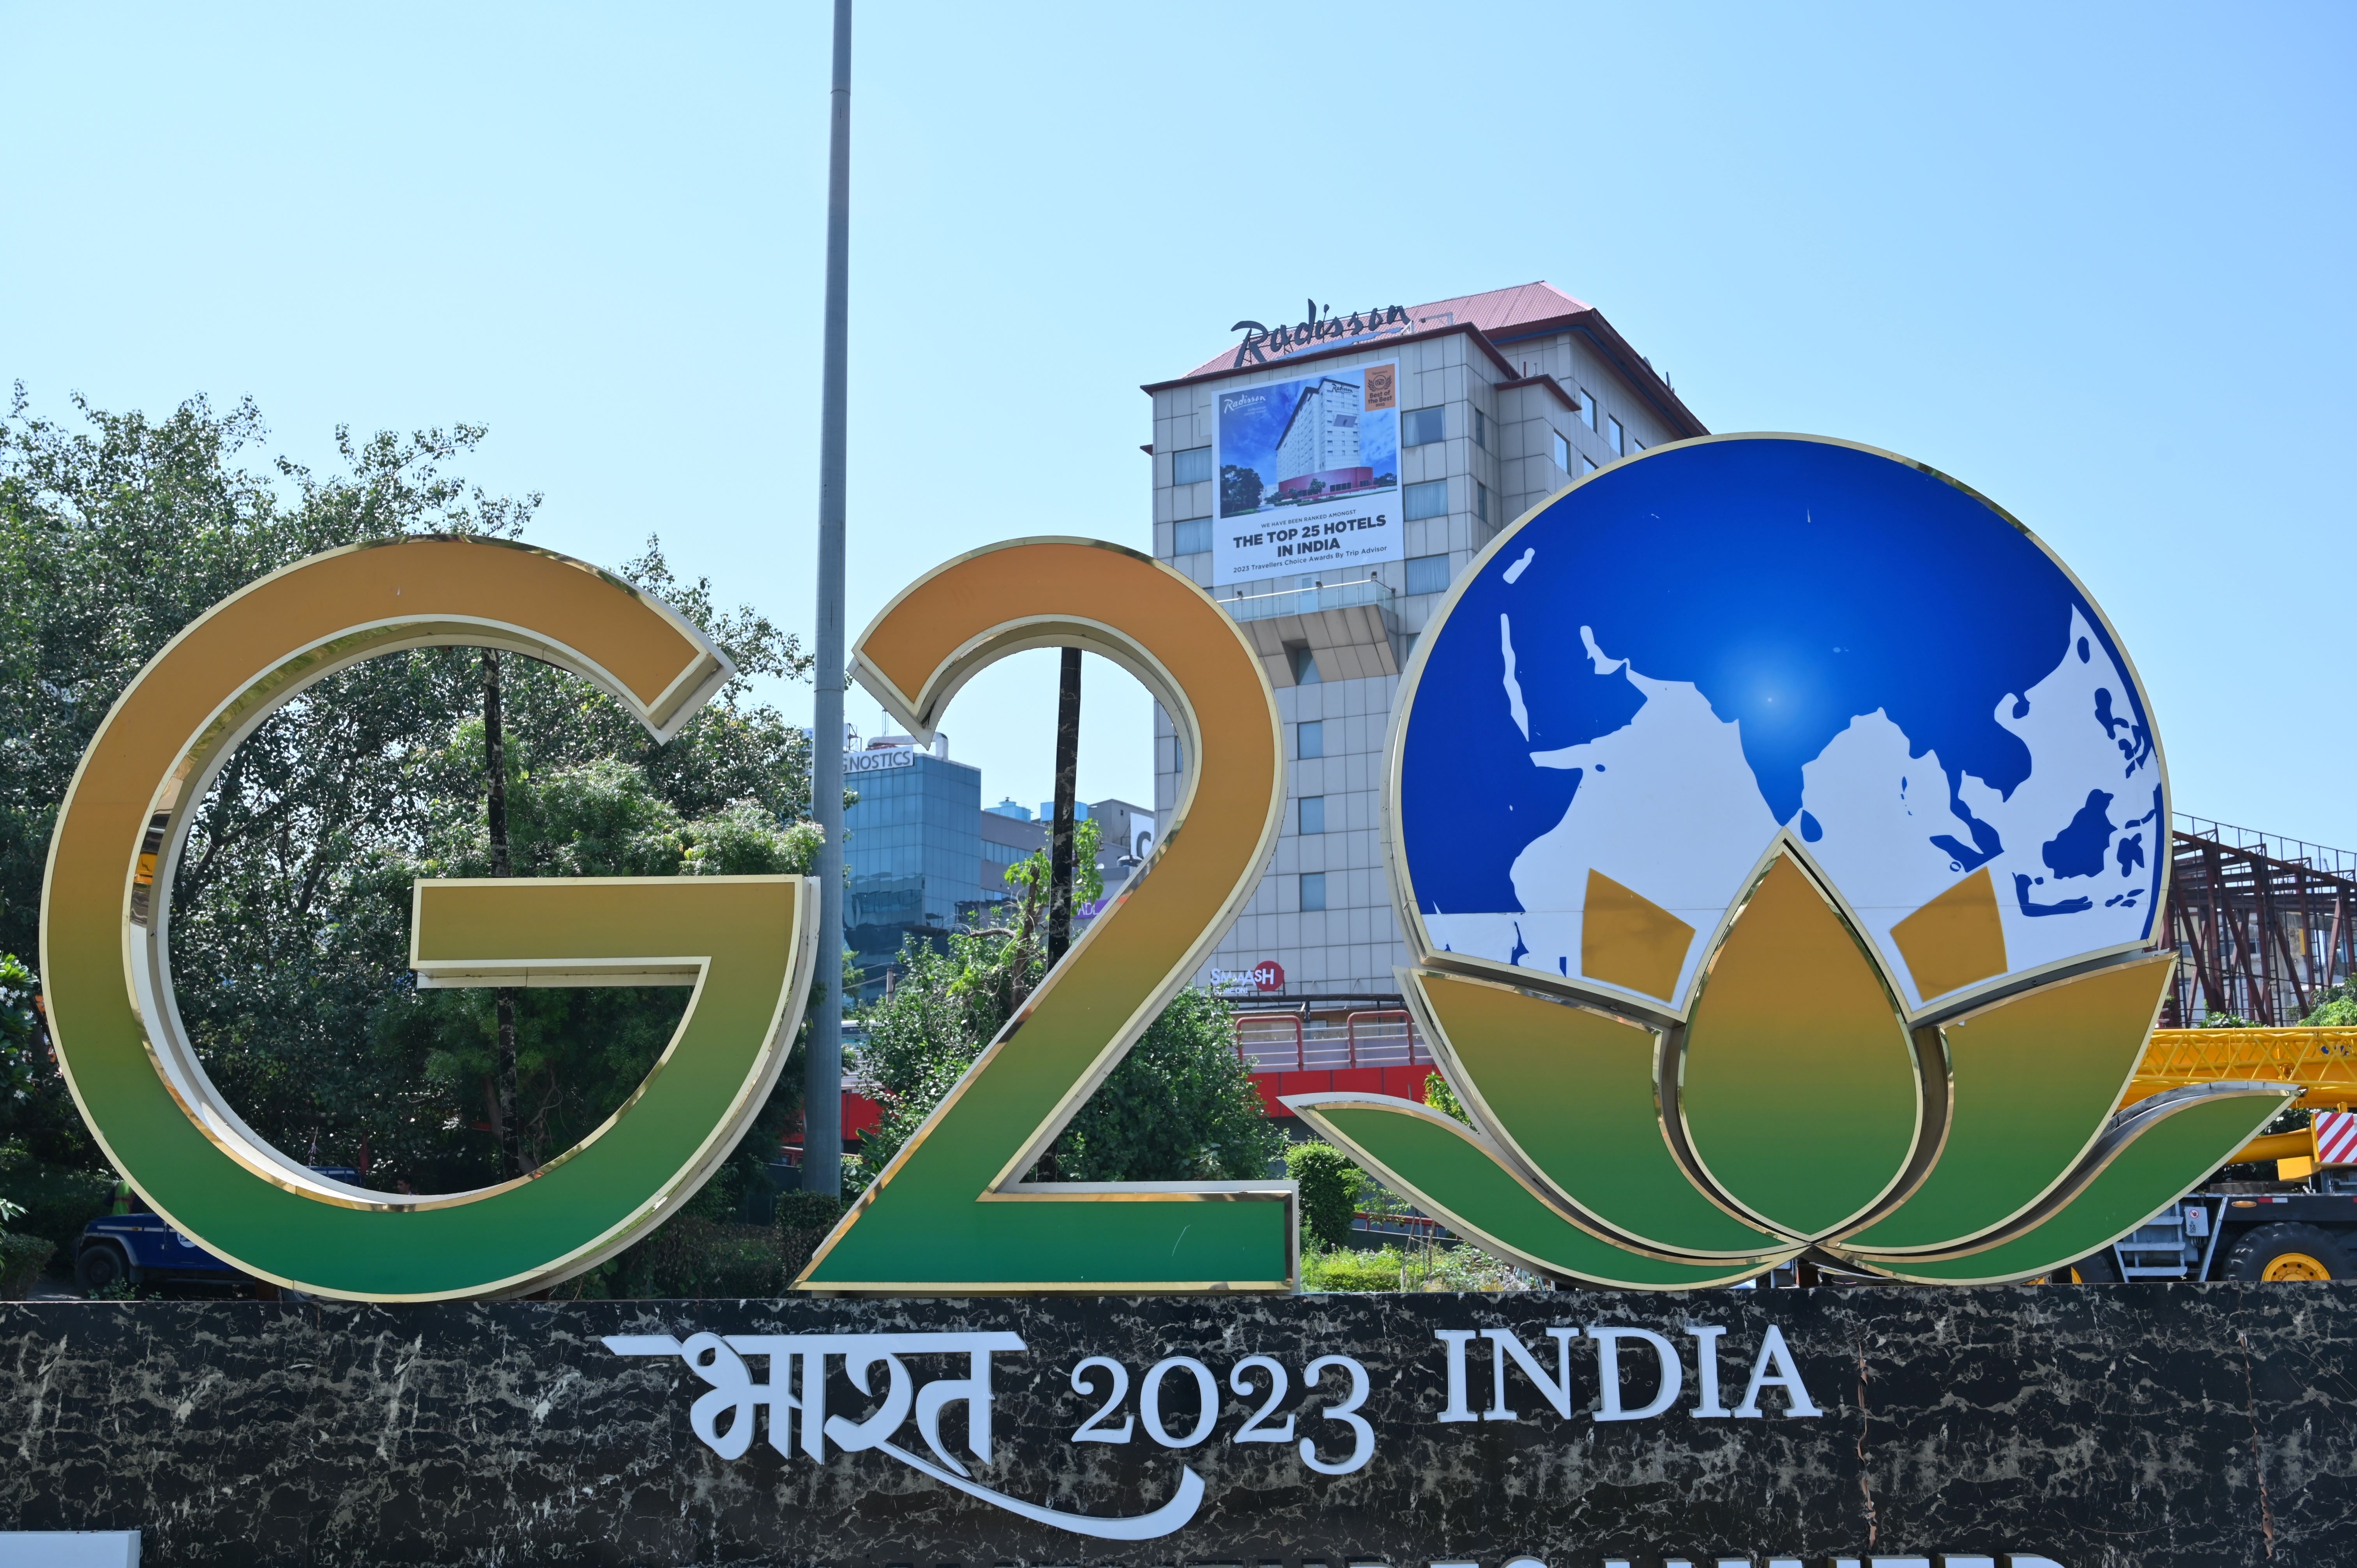 The G20 Leaders’ Summit in New Delhi saw the world's largest economies reach  consensus to issue a joint declaration spanning multiple issues. Photo by Shutterstock.